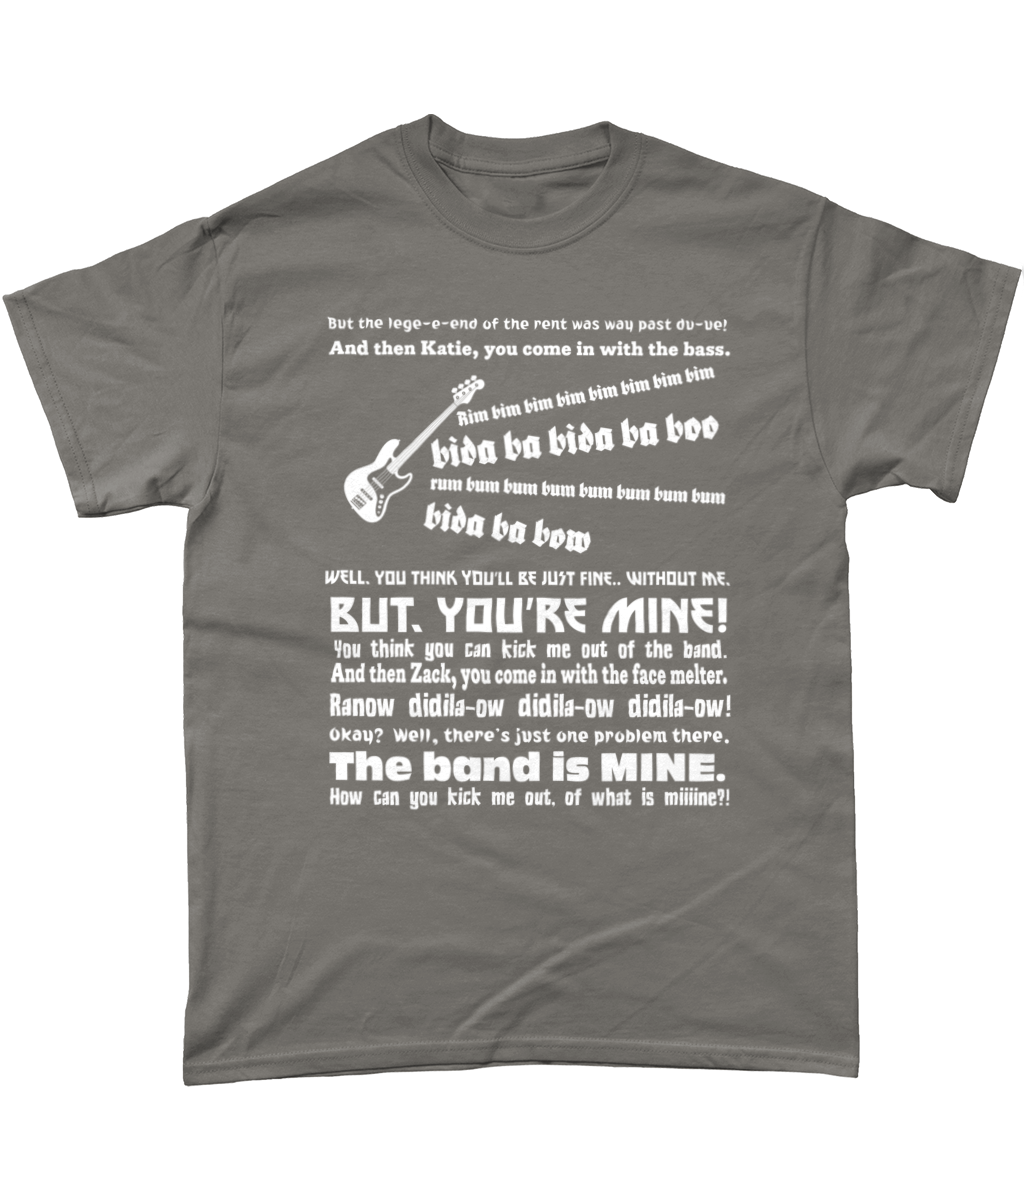 The Legend of The Rent T-Shirt